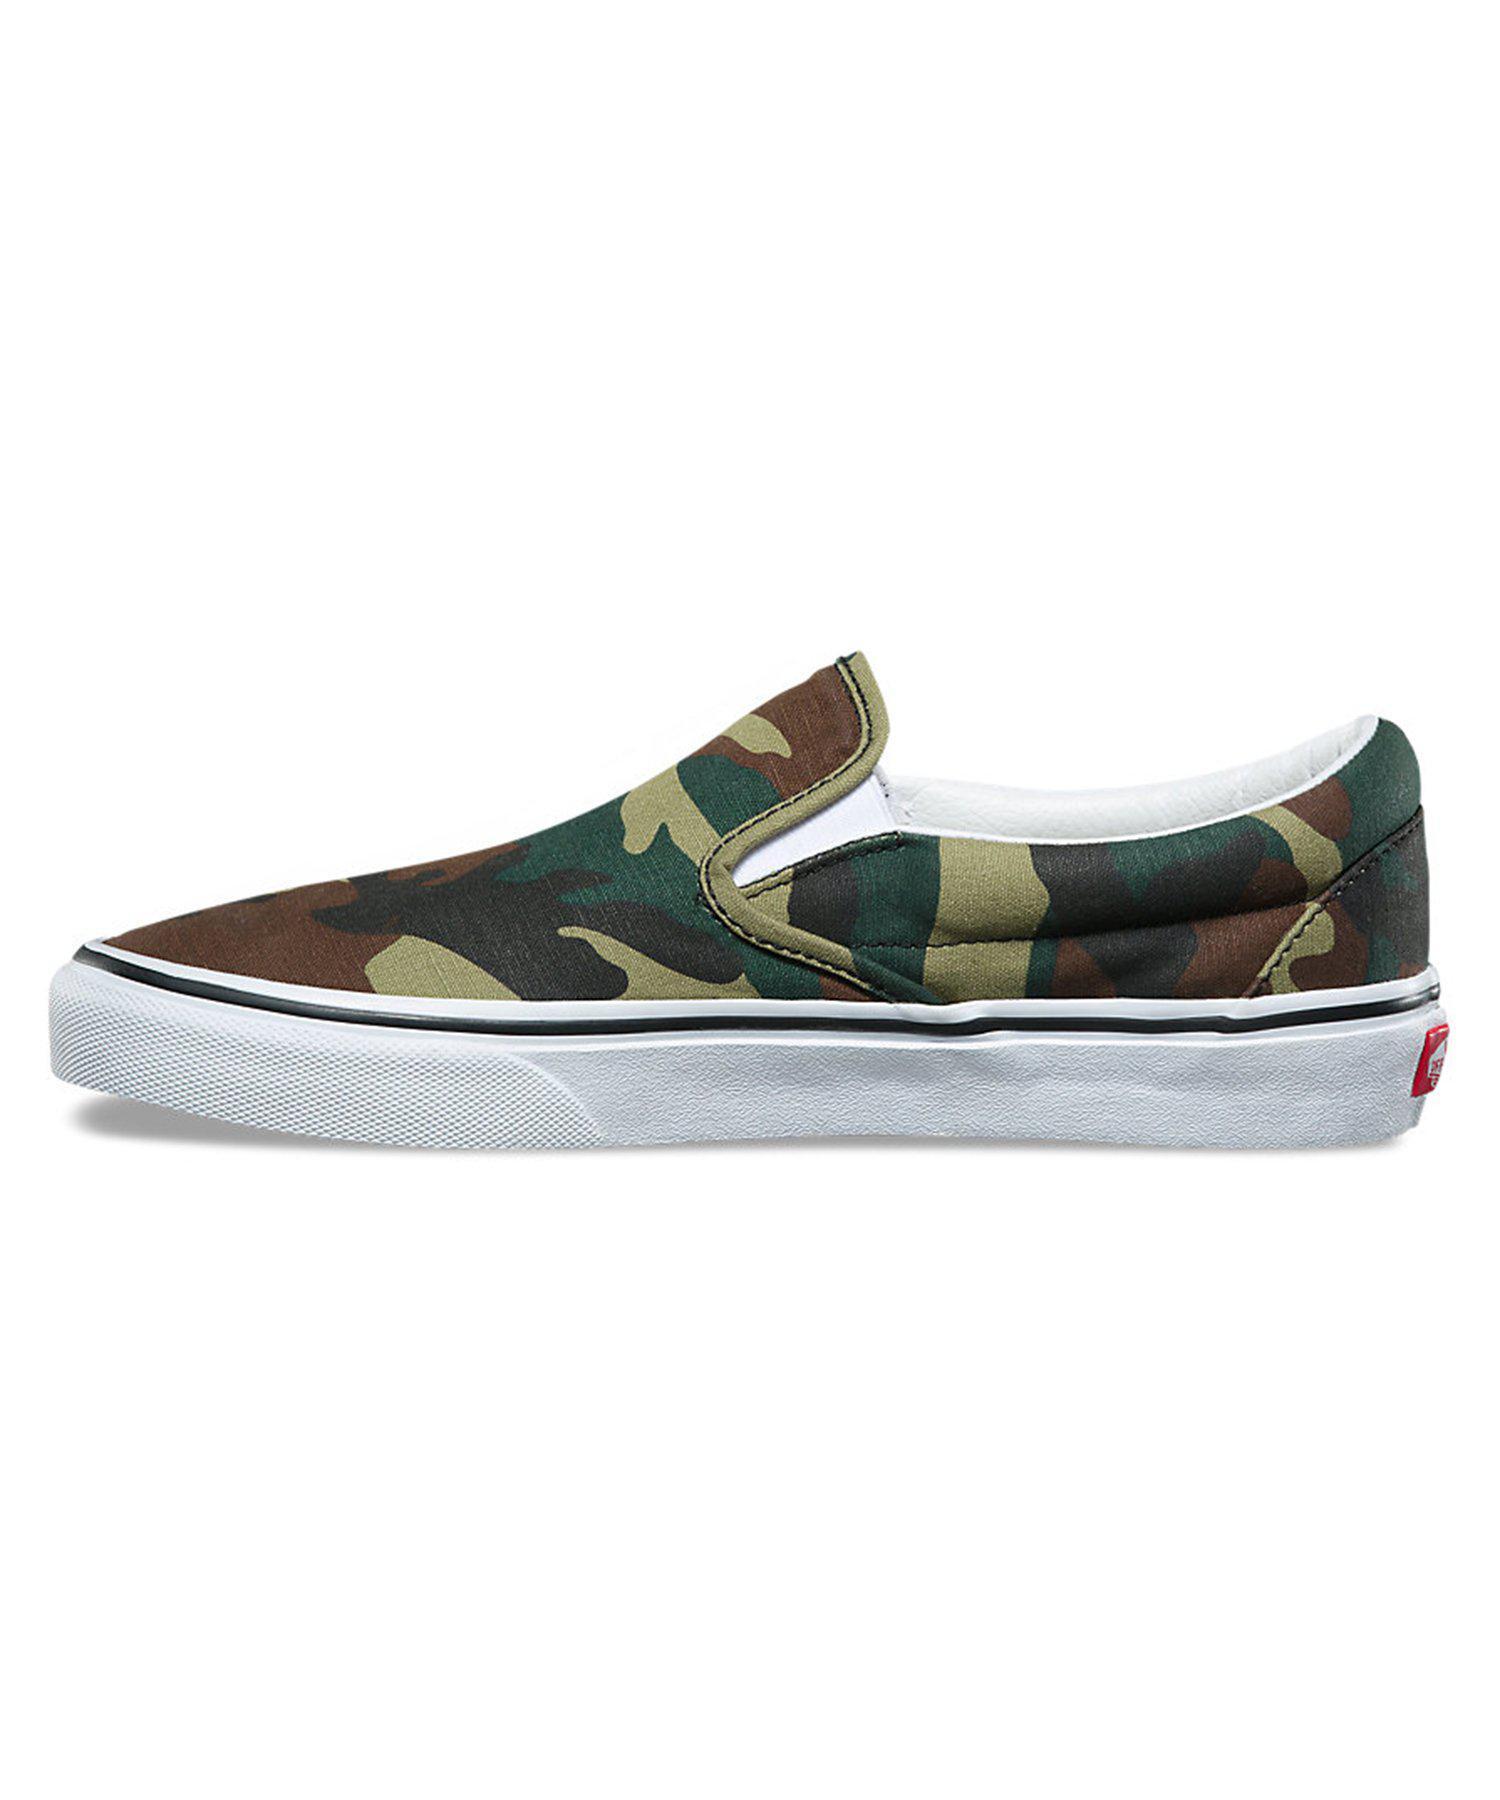 Vans Canvas Classic Slip On In Woodland Camo in Black for Men - Lyst